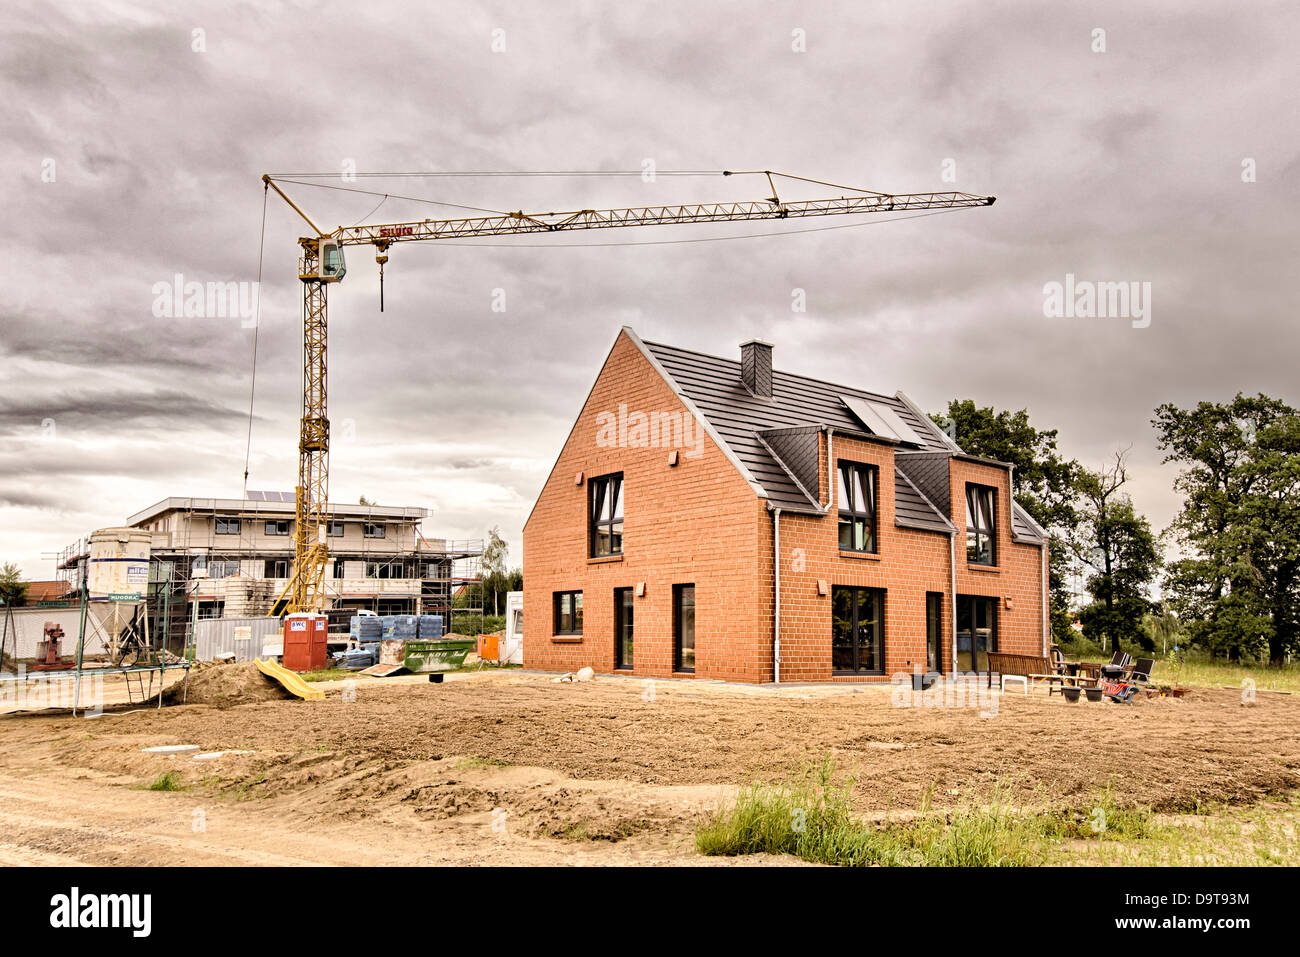 Dark clouds above a developing area with complete residential house and construction site Stock Photo